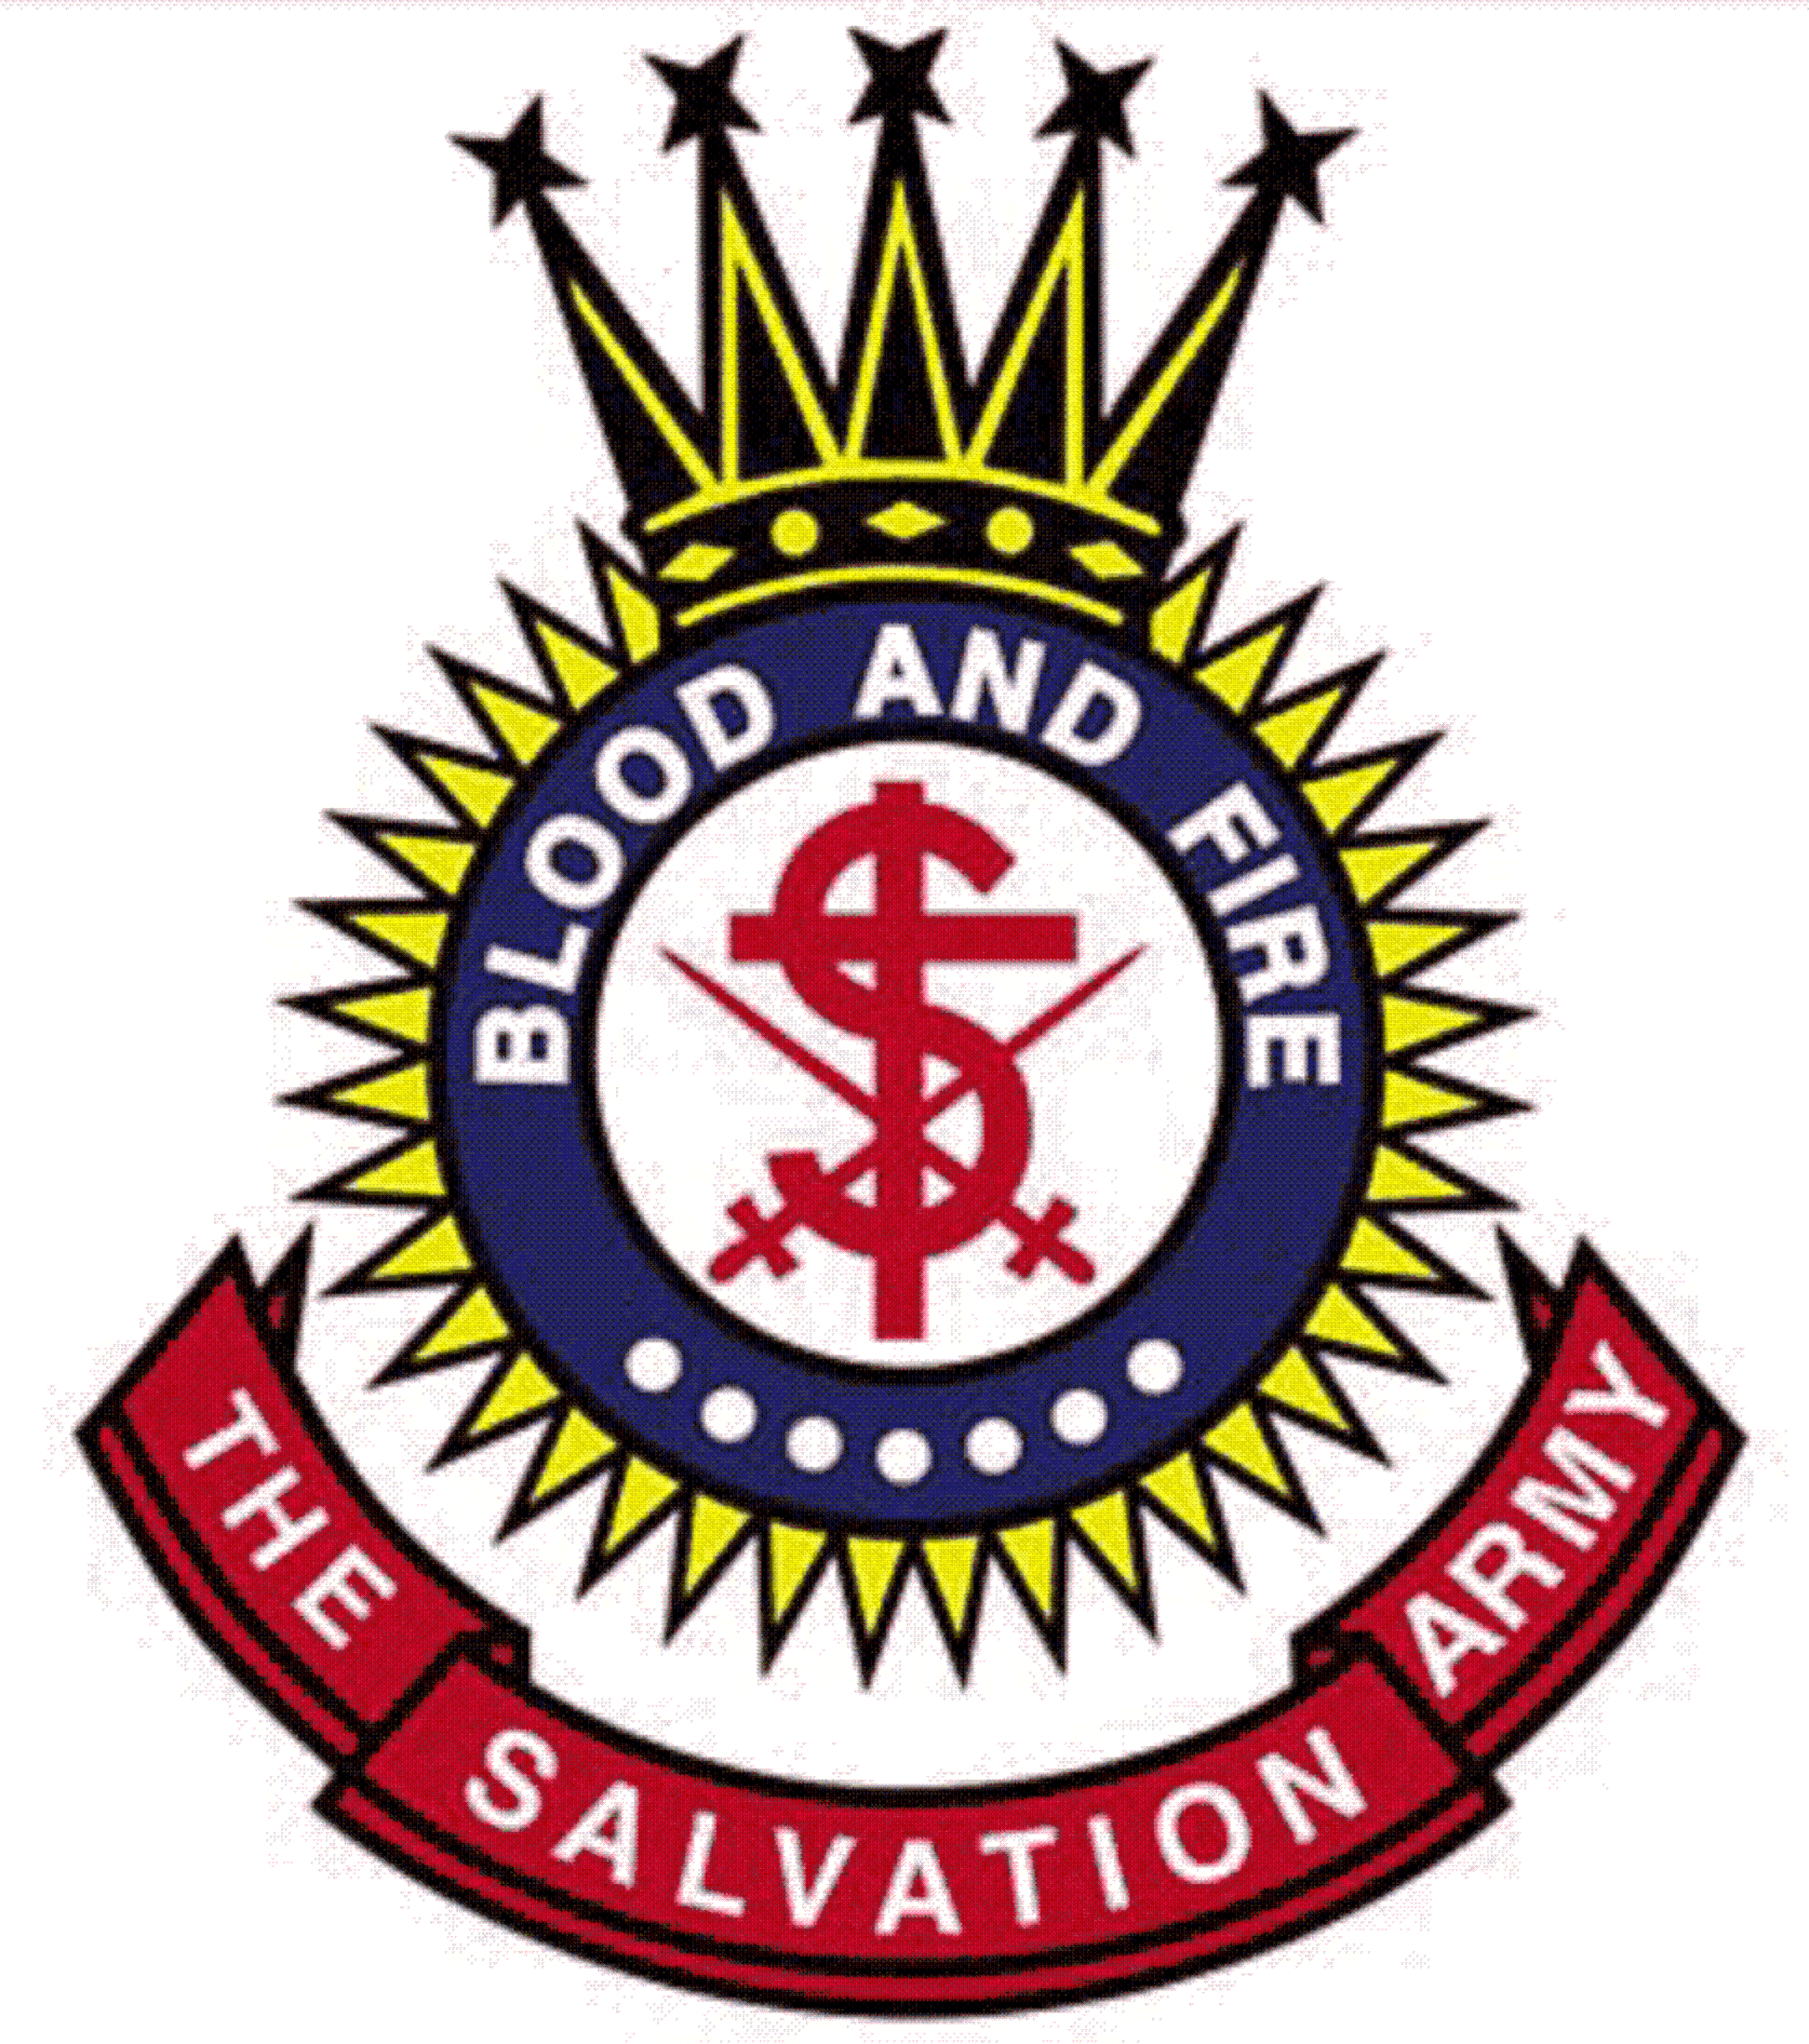 The Salvation Army Character Building Programs